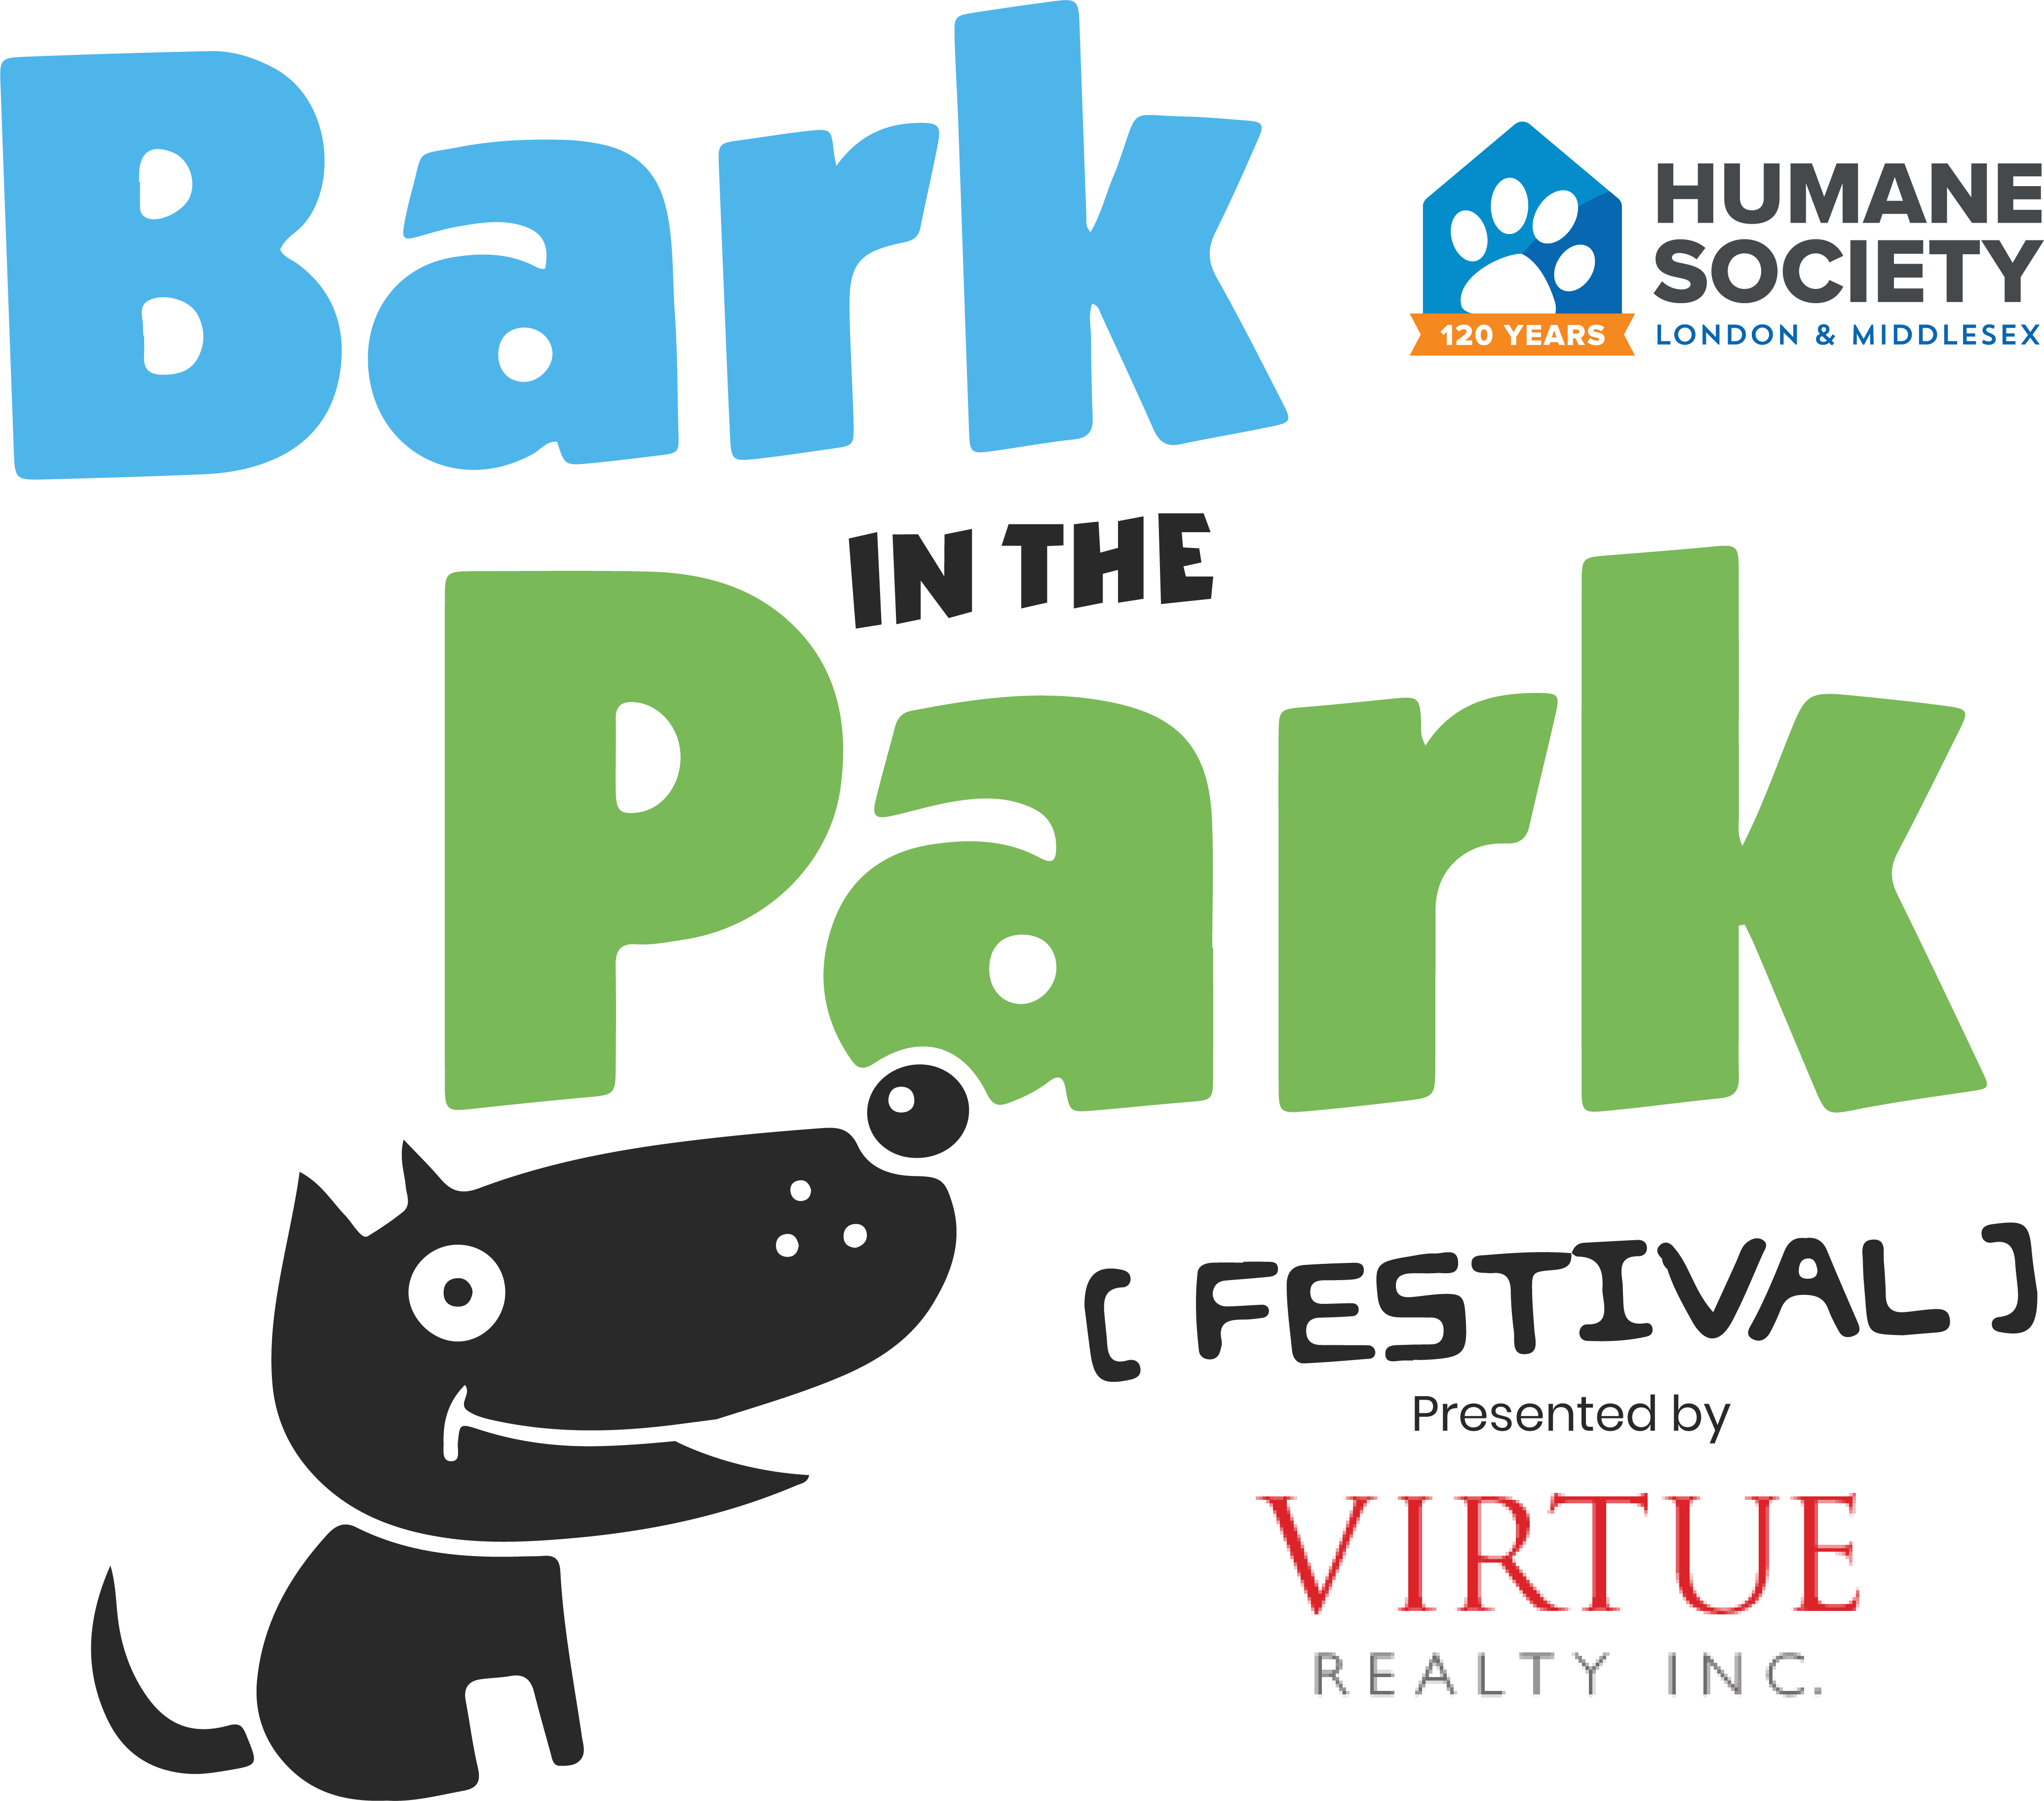 35th Bark in the Park Festival Presented by Virtue Realty Inc. Humane